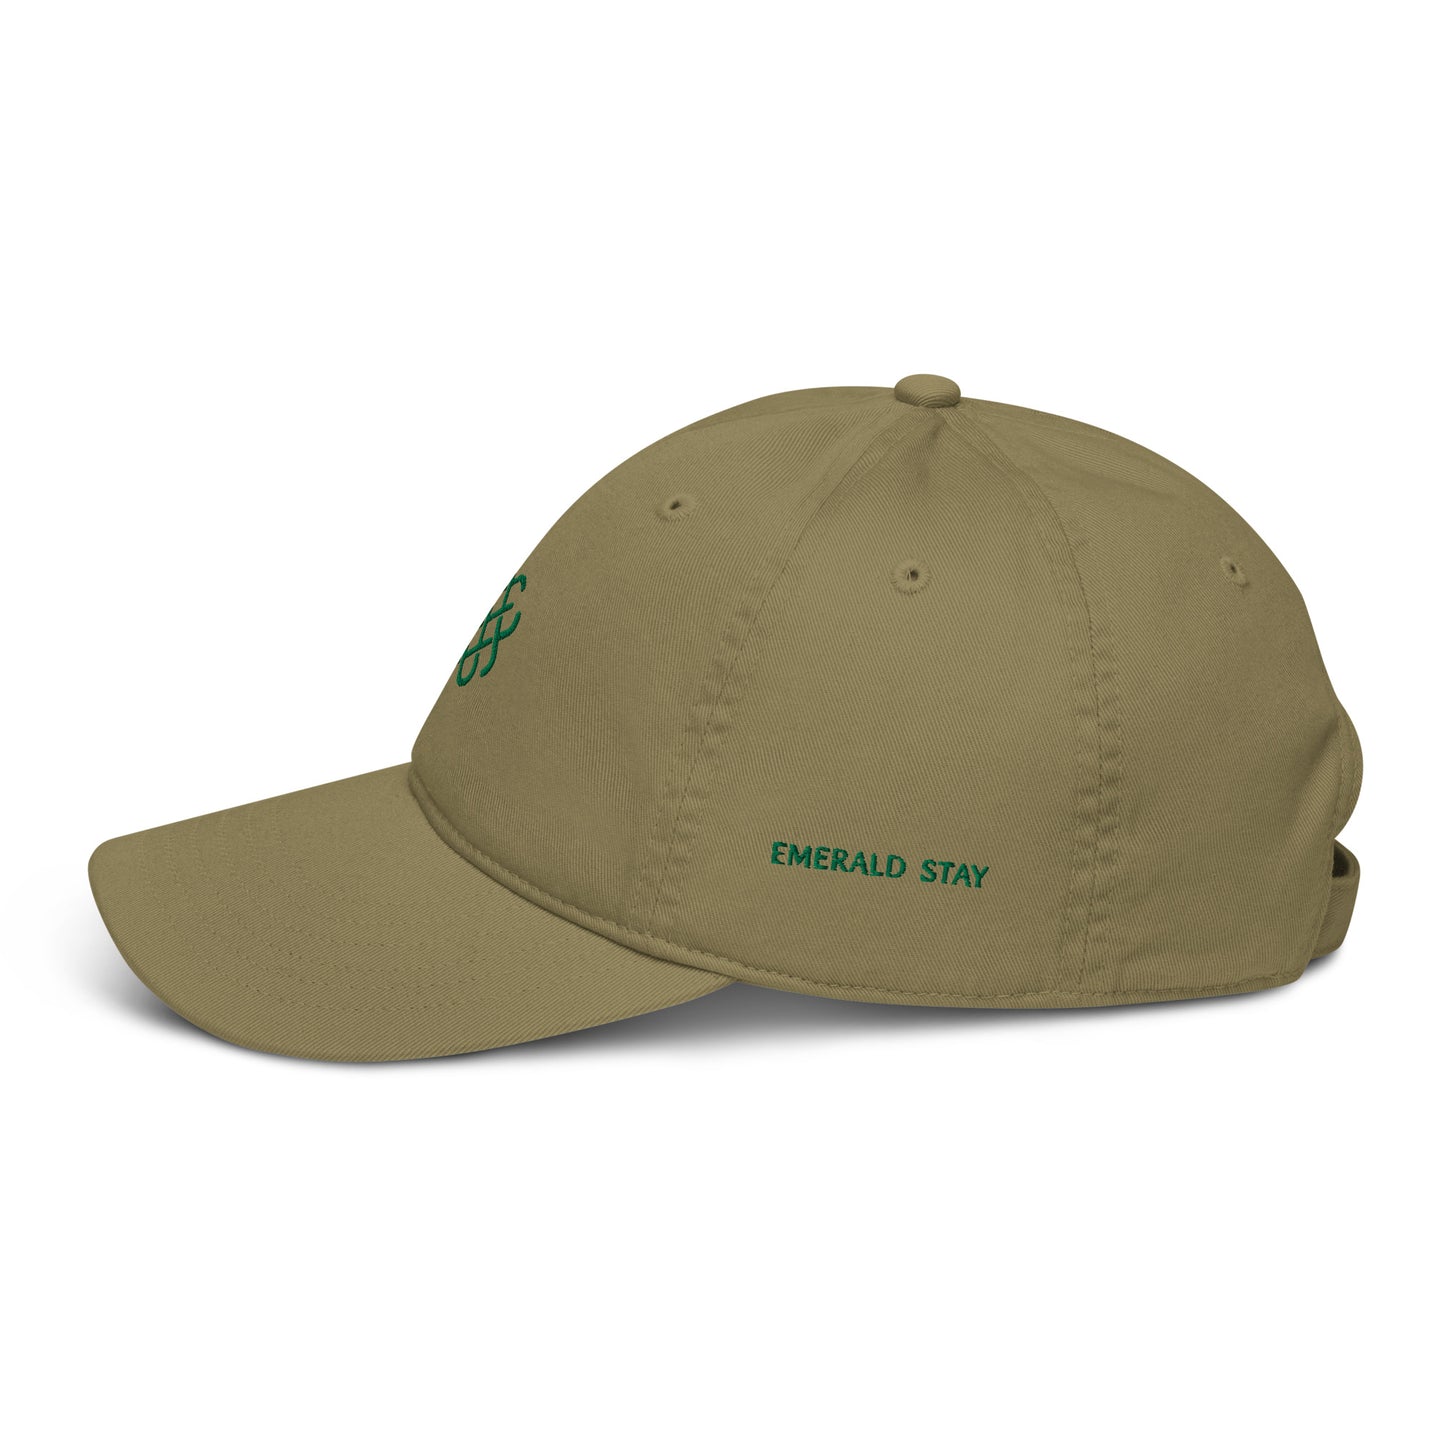 Emerald Stay - Green Icon embroidered - Organic hat